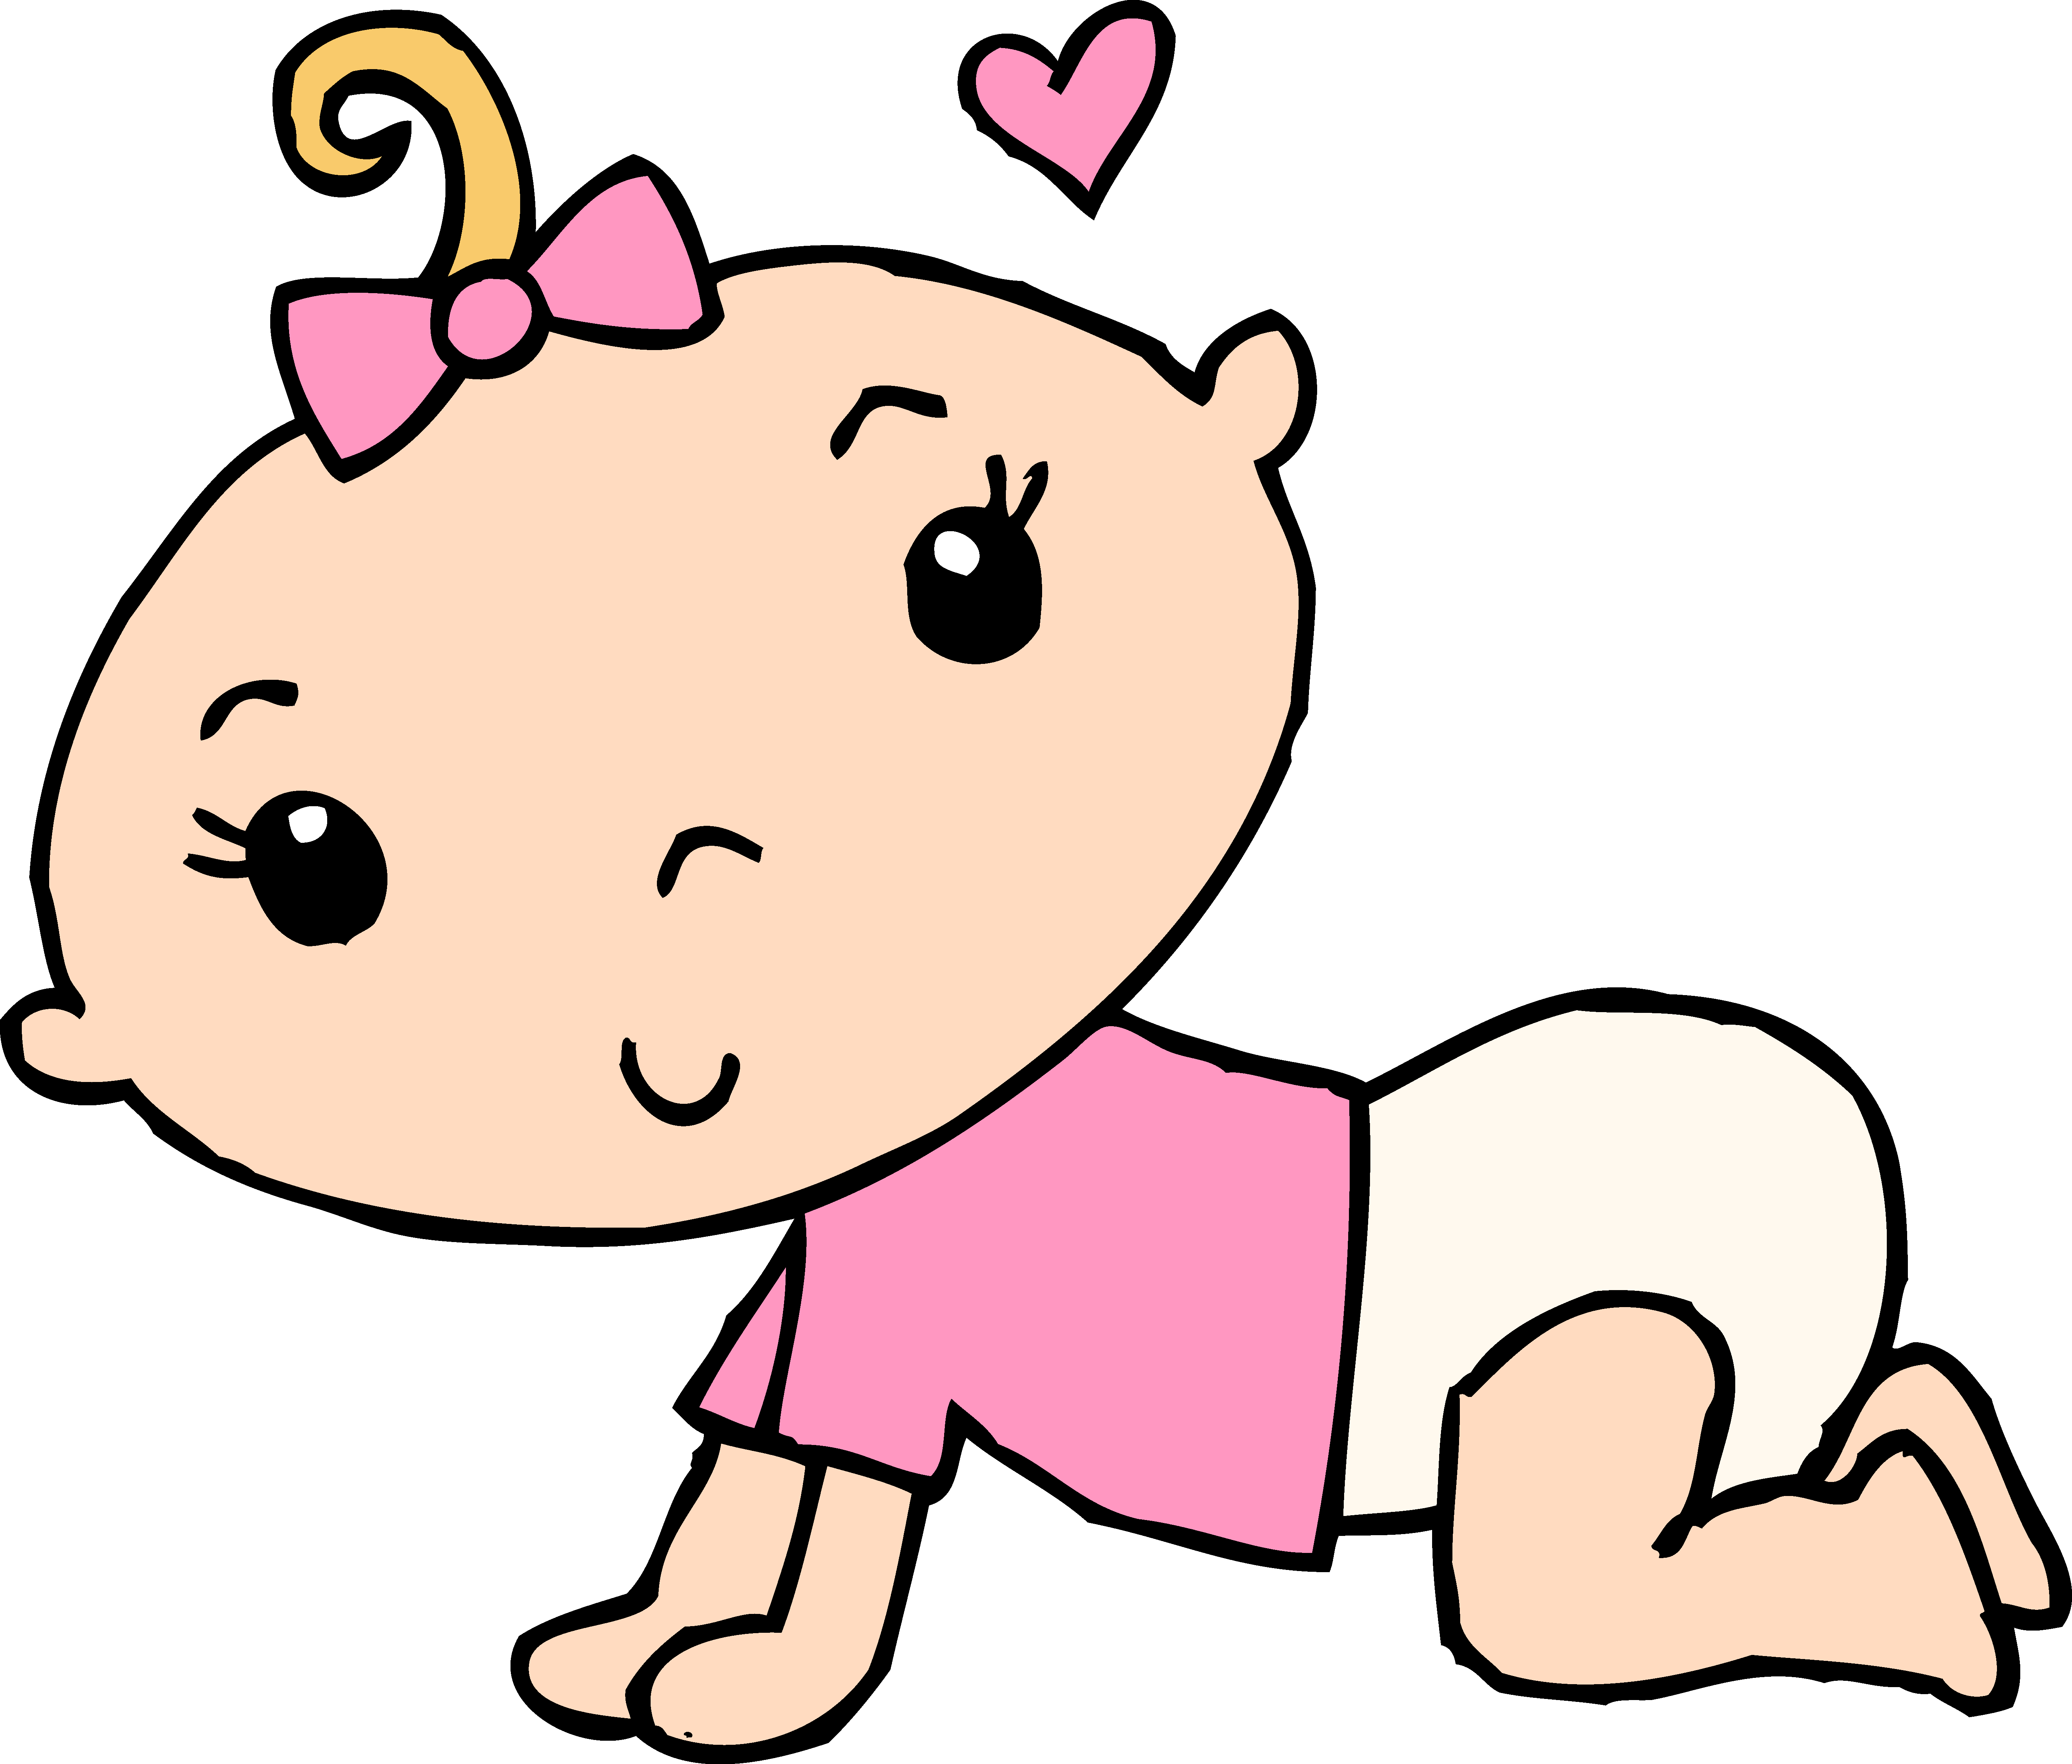 Free Baby Girl Clipart, Download Free Clip Art, Free Clip.